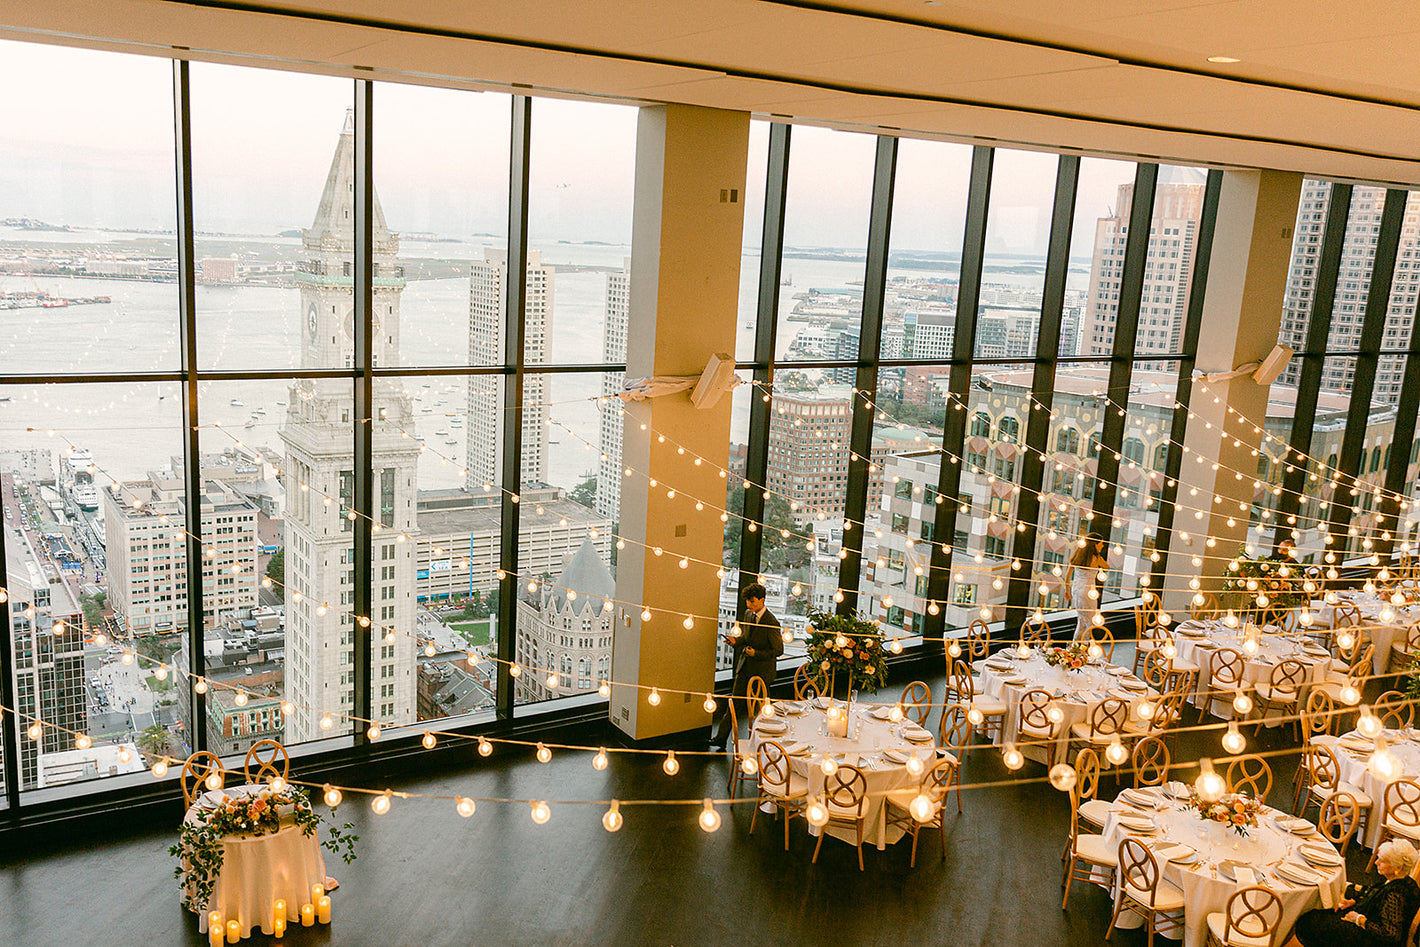 View of Ballroom at the State Room overlooking Boston waterfront.